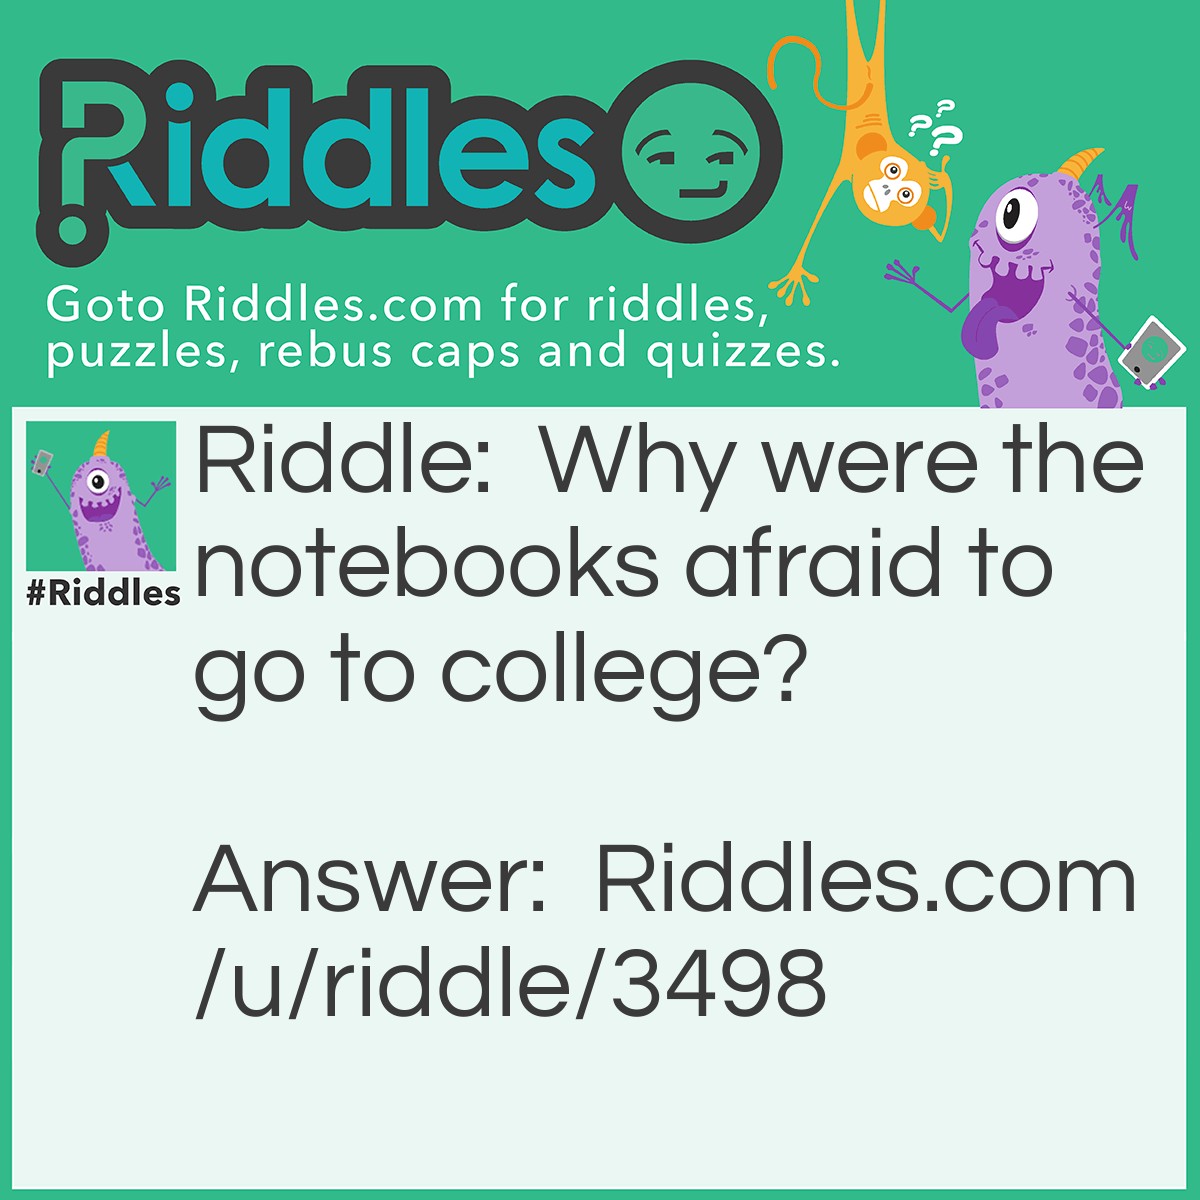 Riddle: Why were the notebooks afraid to go to college? Answer: Because the College ruled notebooks!